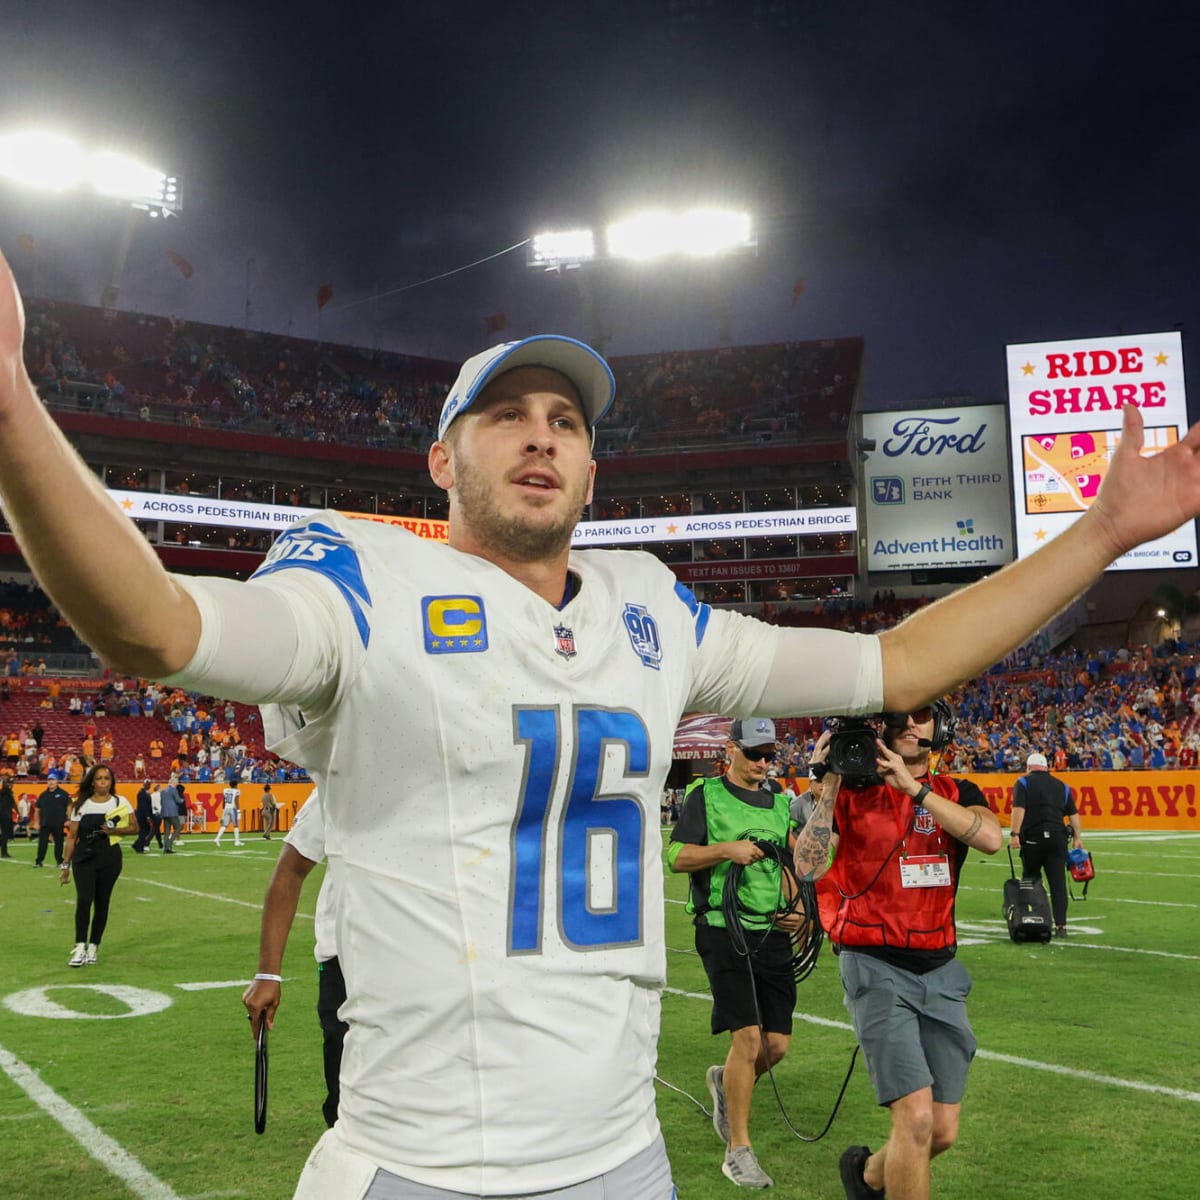 Moss Uniforms on X: Detroit Lions: The Lions have hinted at